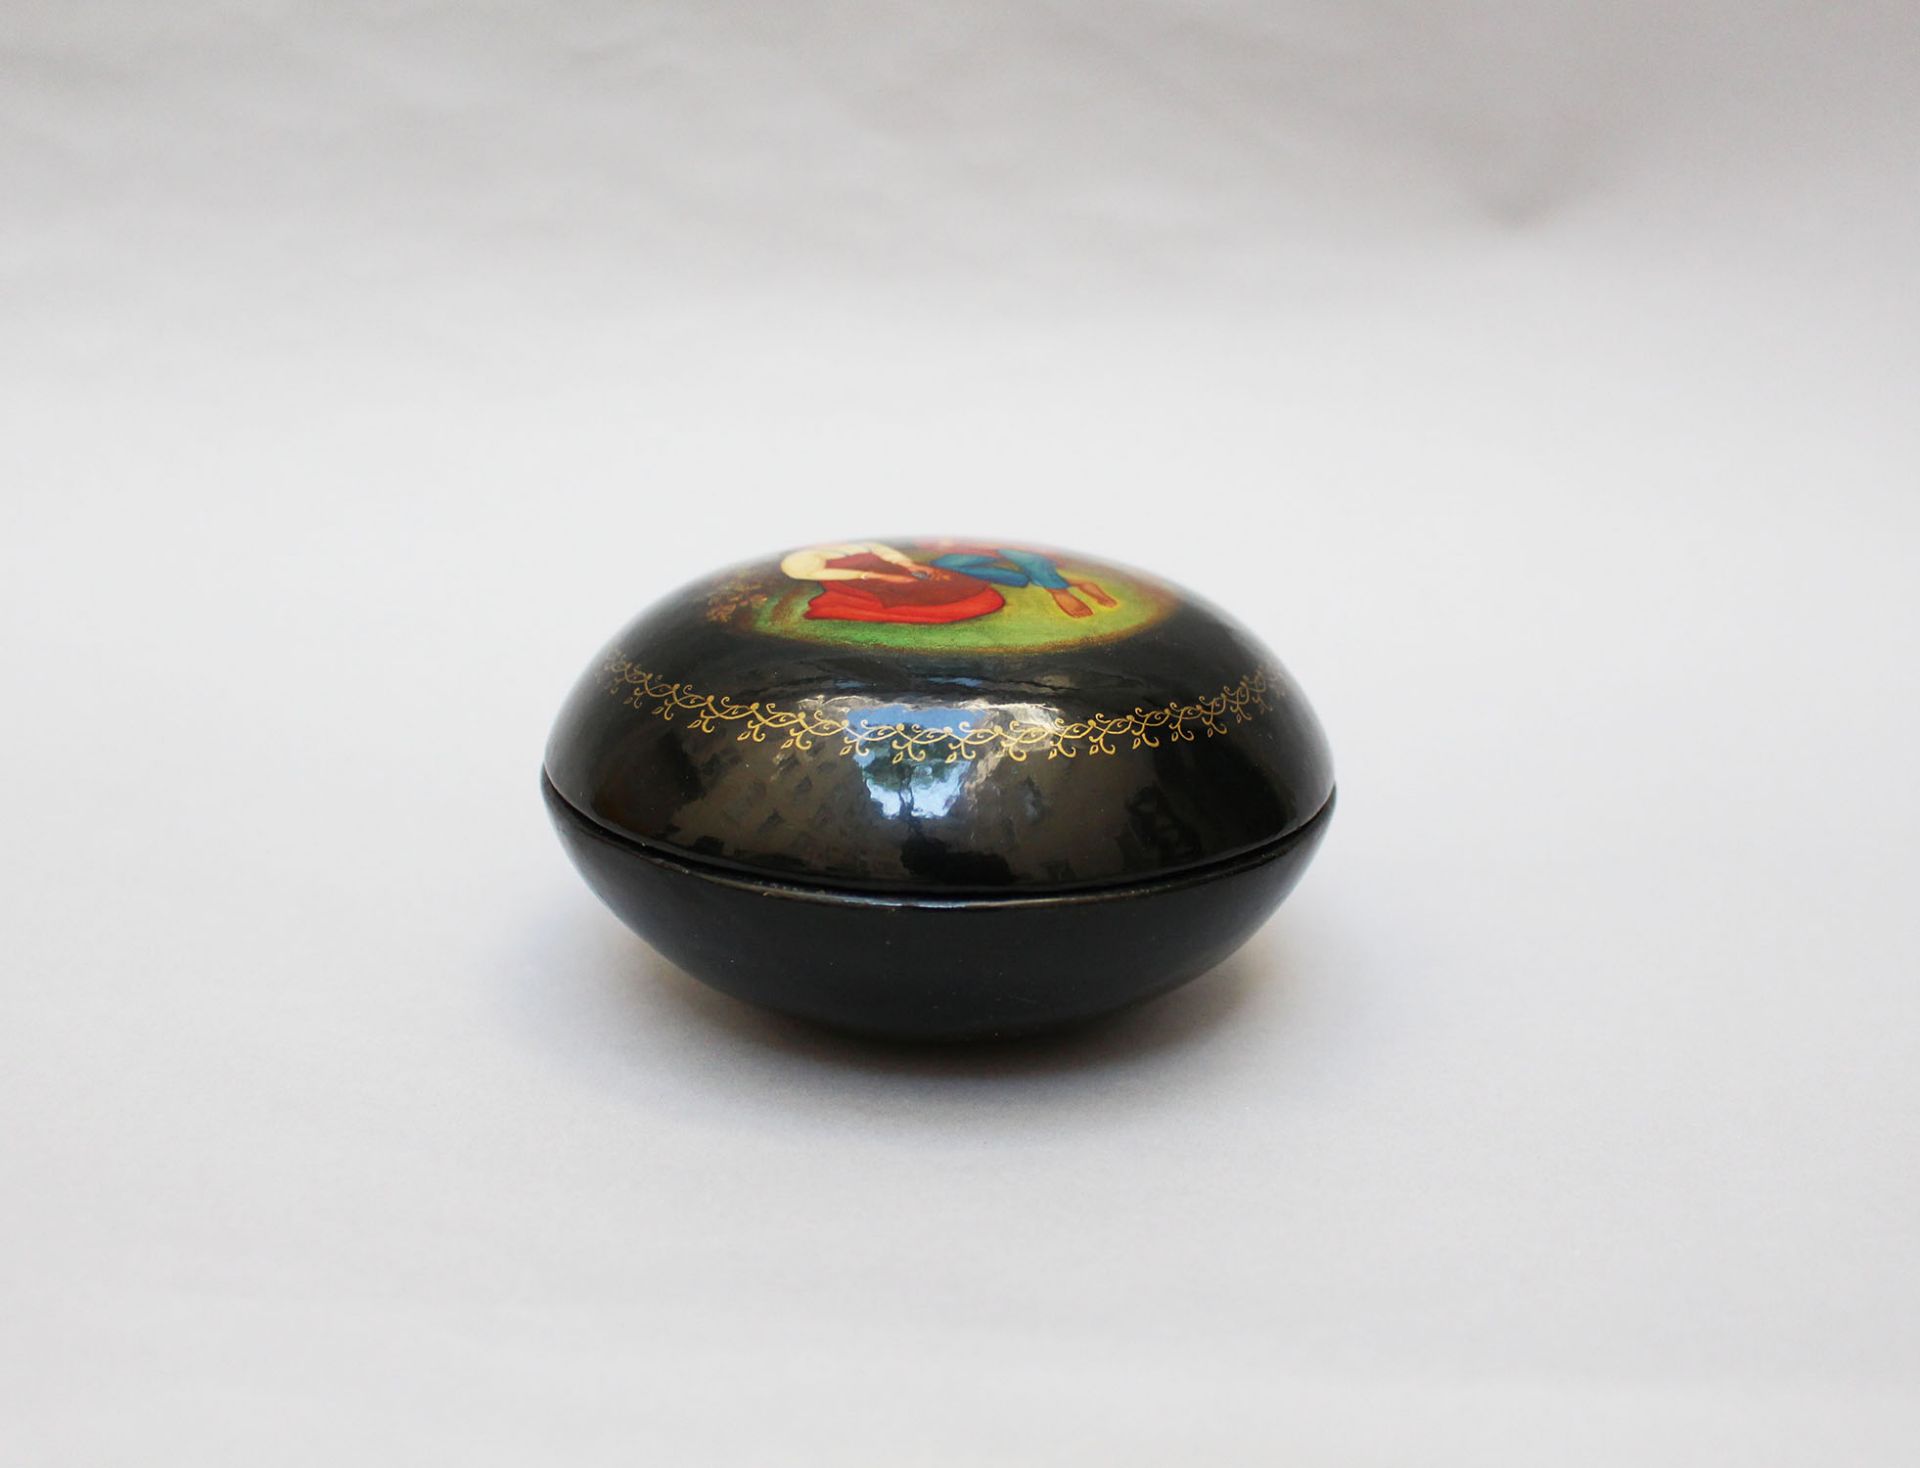 Russian Laquer box - Image 2 of 3